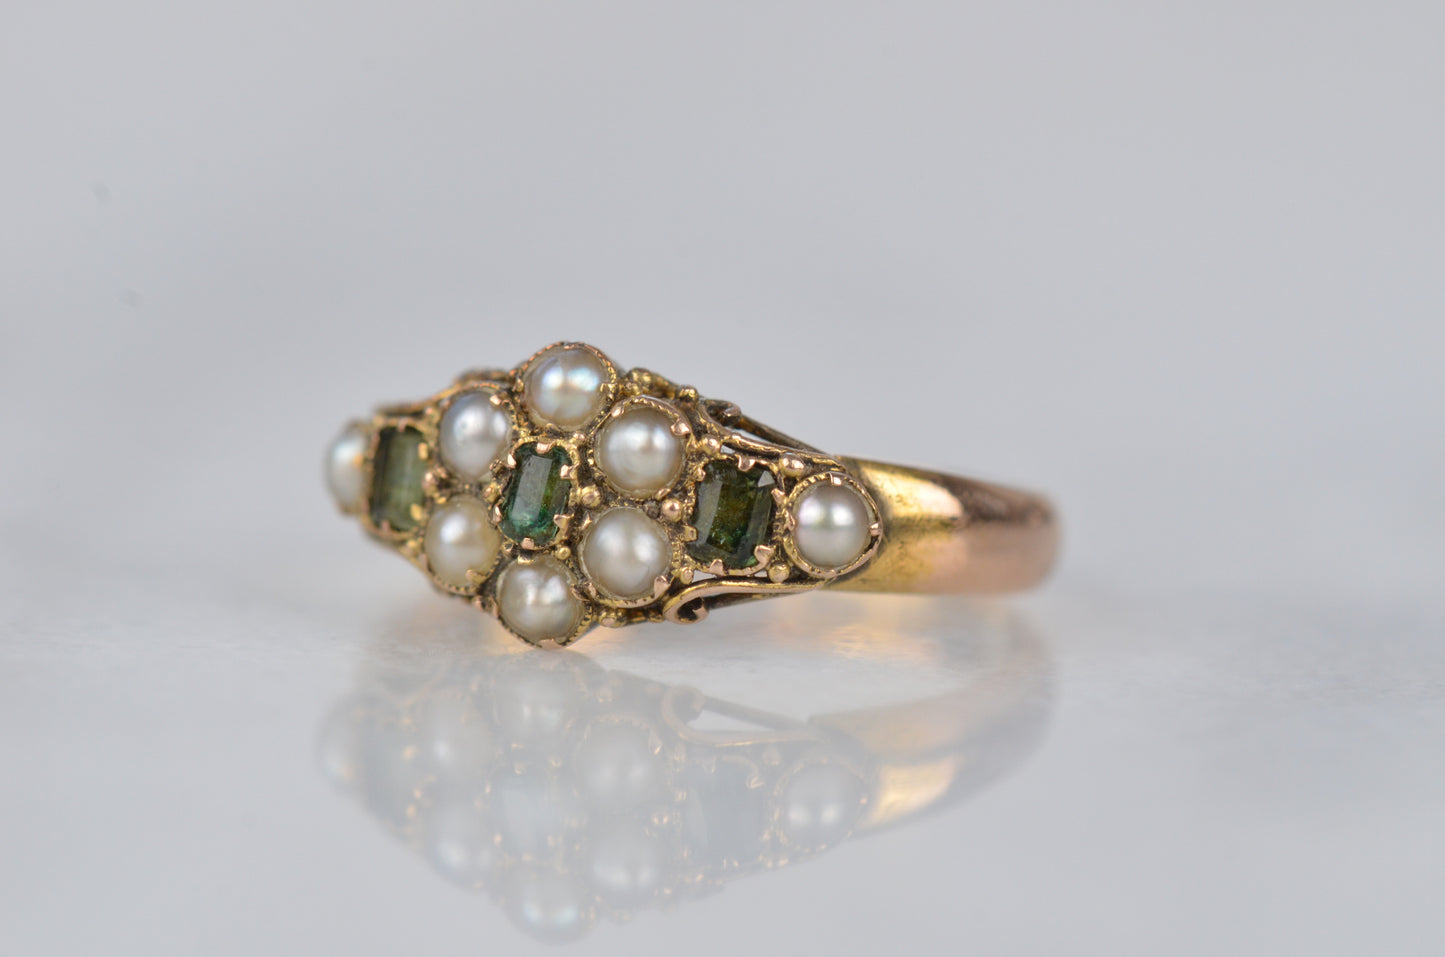 Dreamy Victorian Forget Me Not Ring